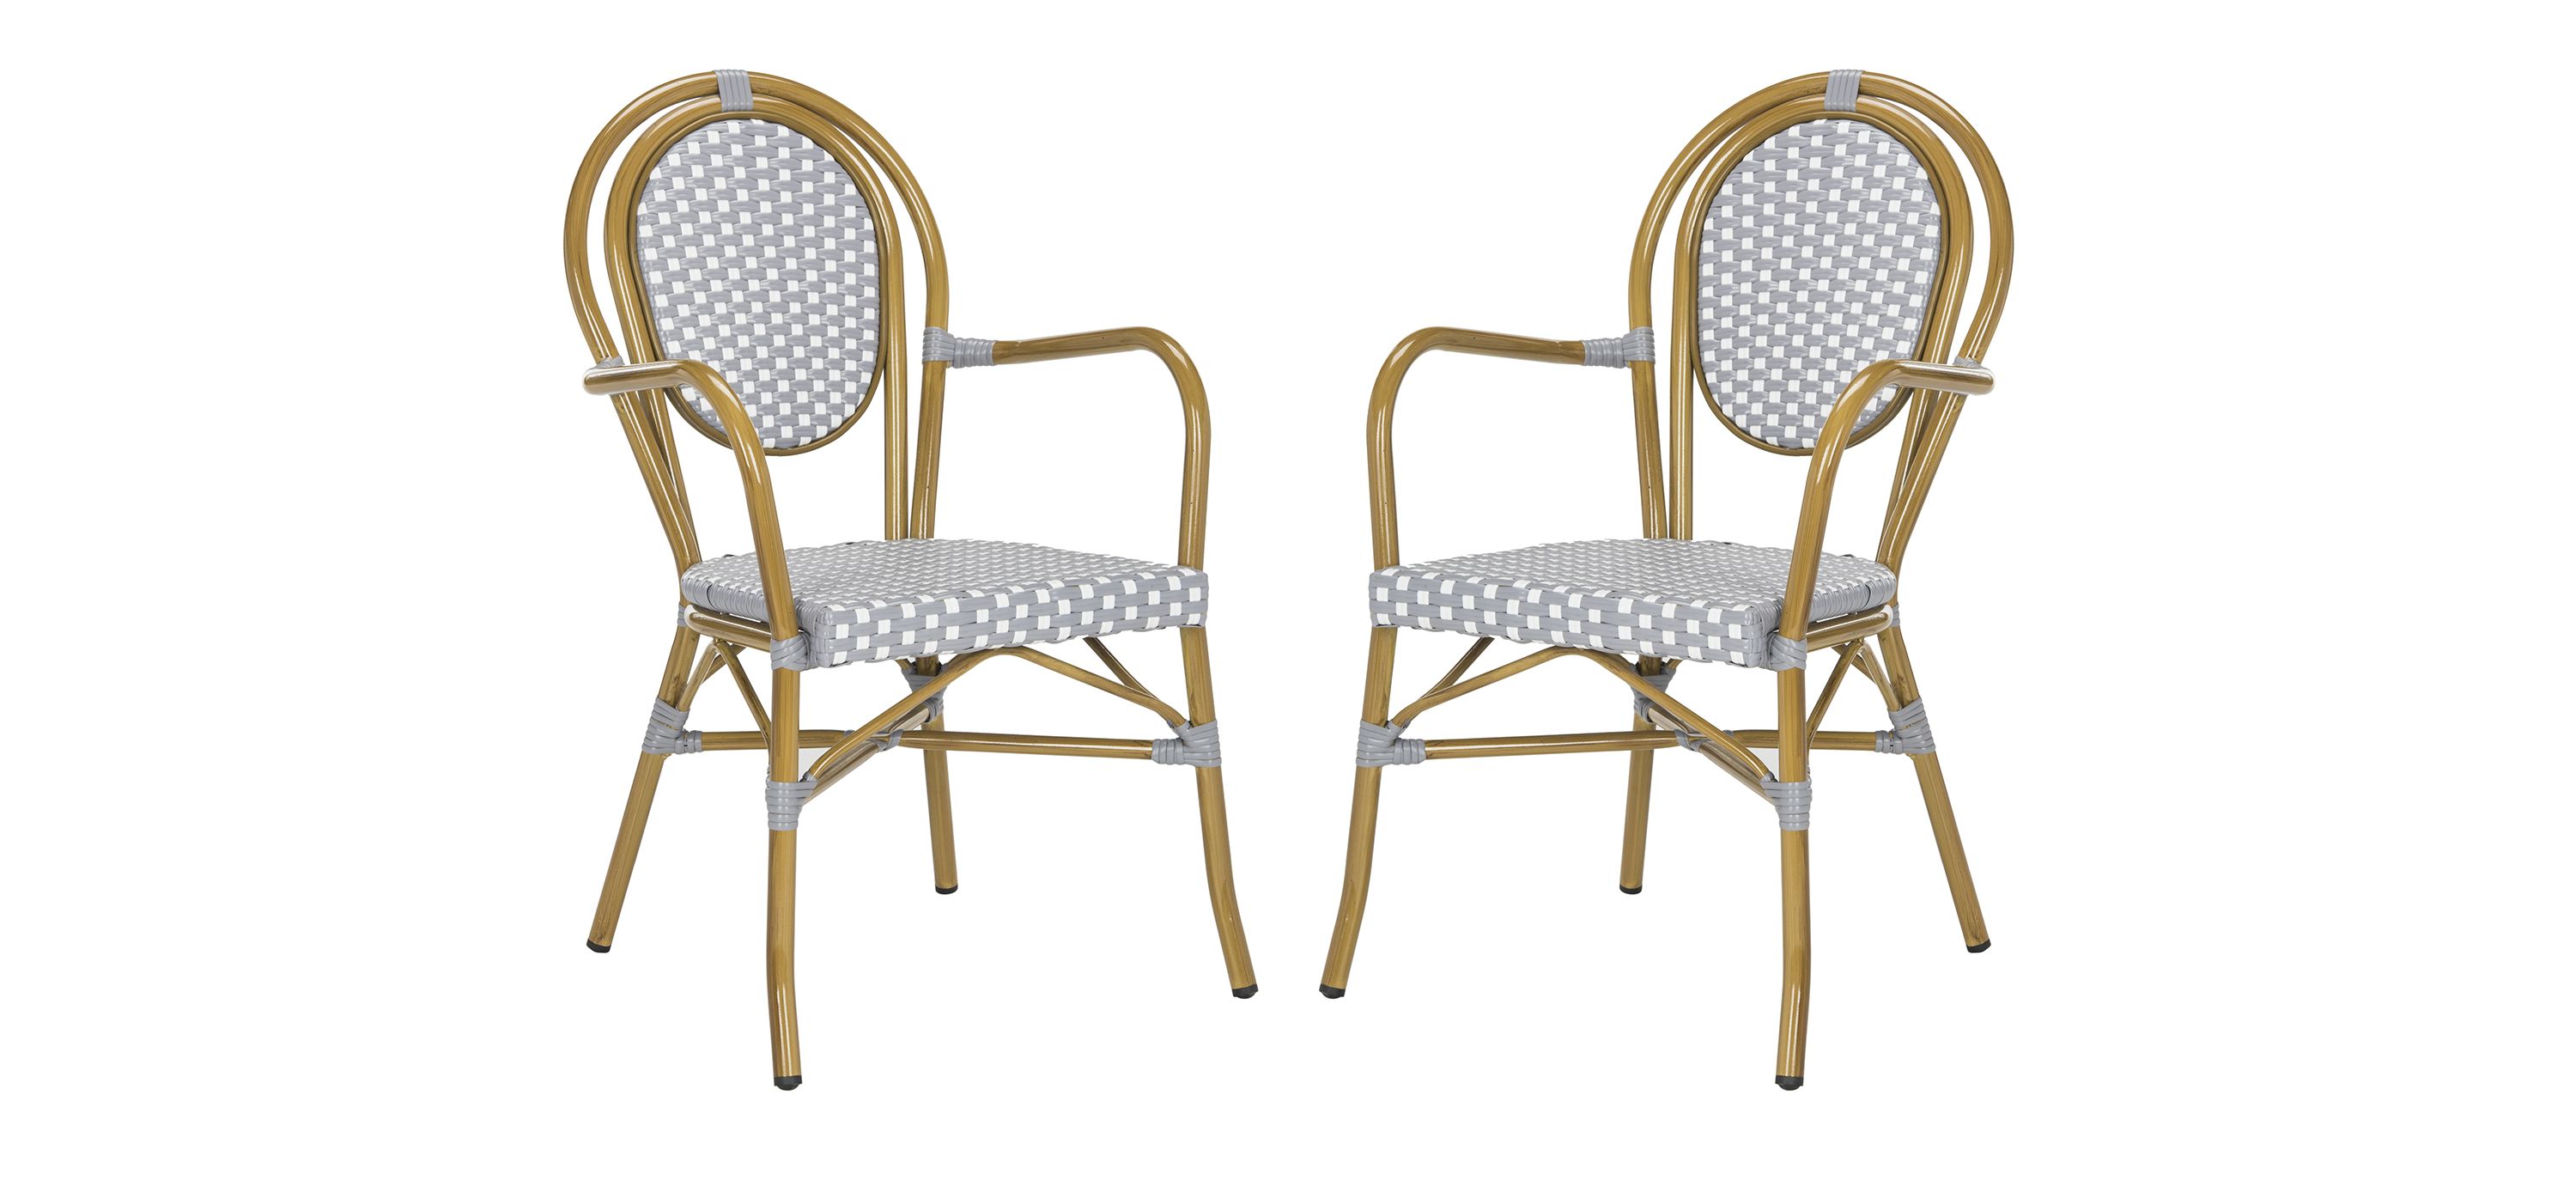 Casella Outdoor Arm Chair - Set of 2